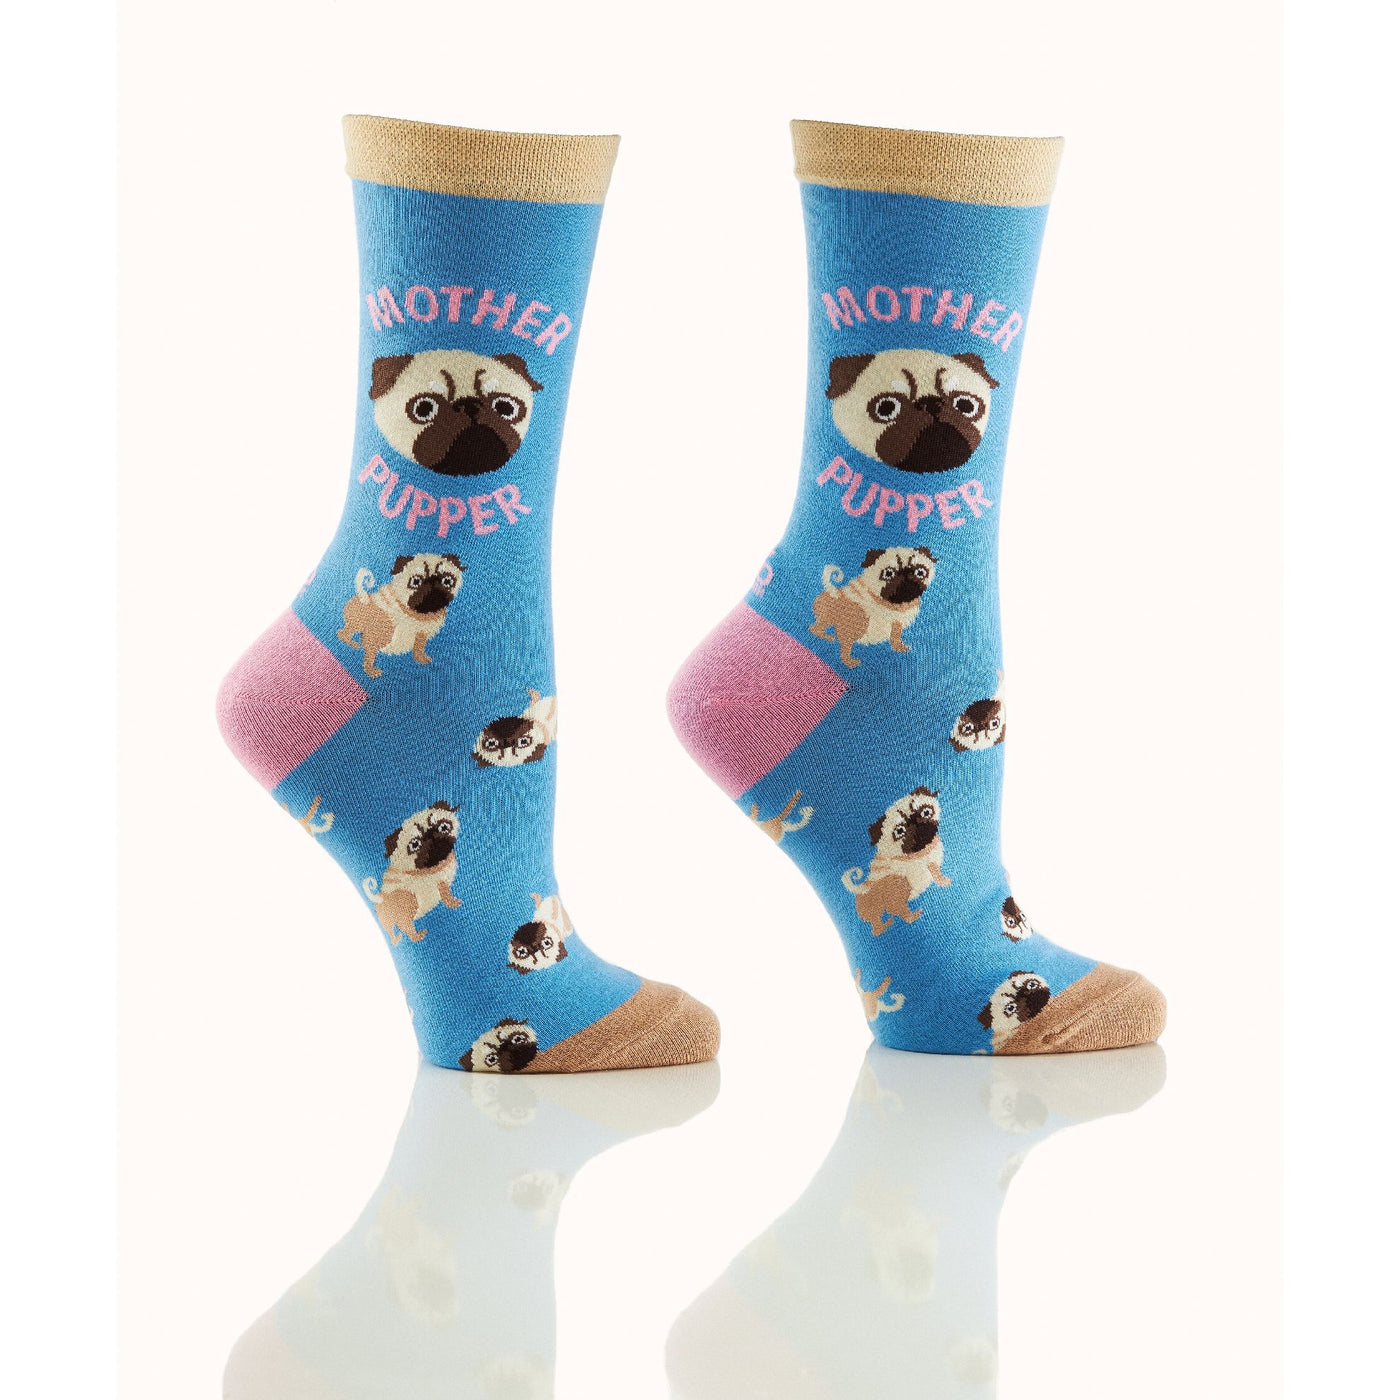 Calcetines altos para mujer, Mother Pupper 